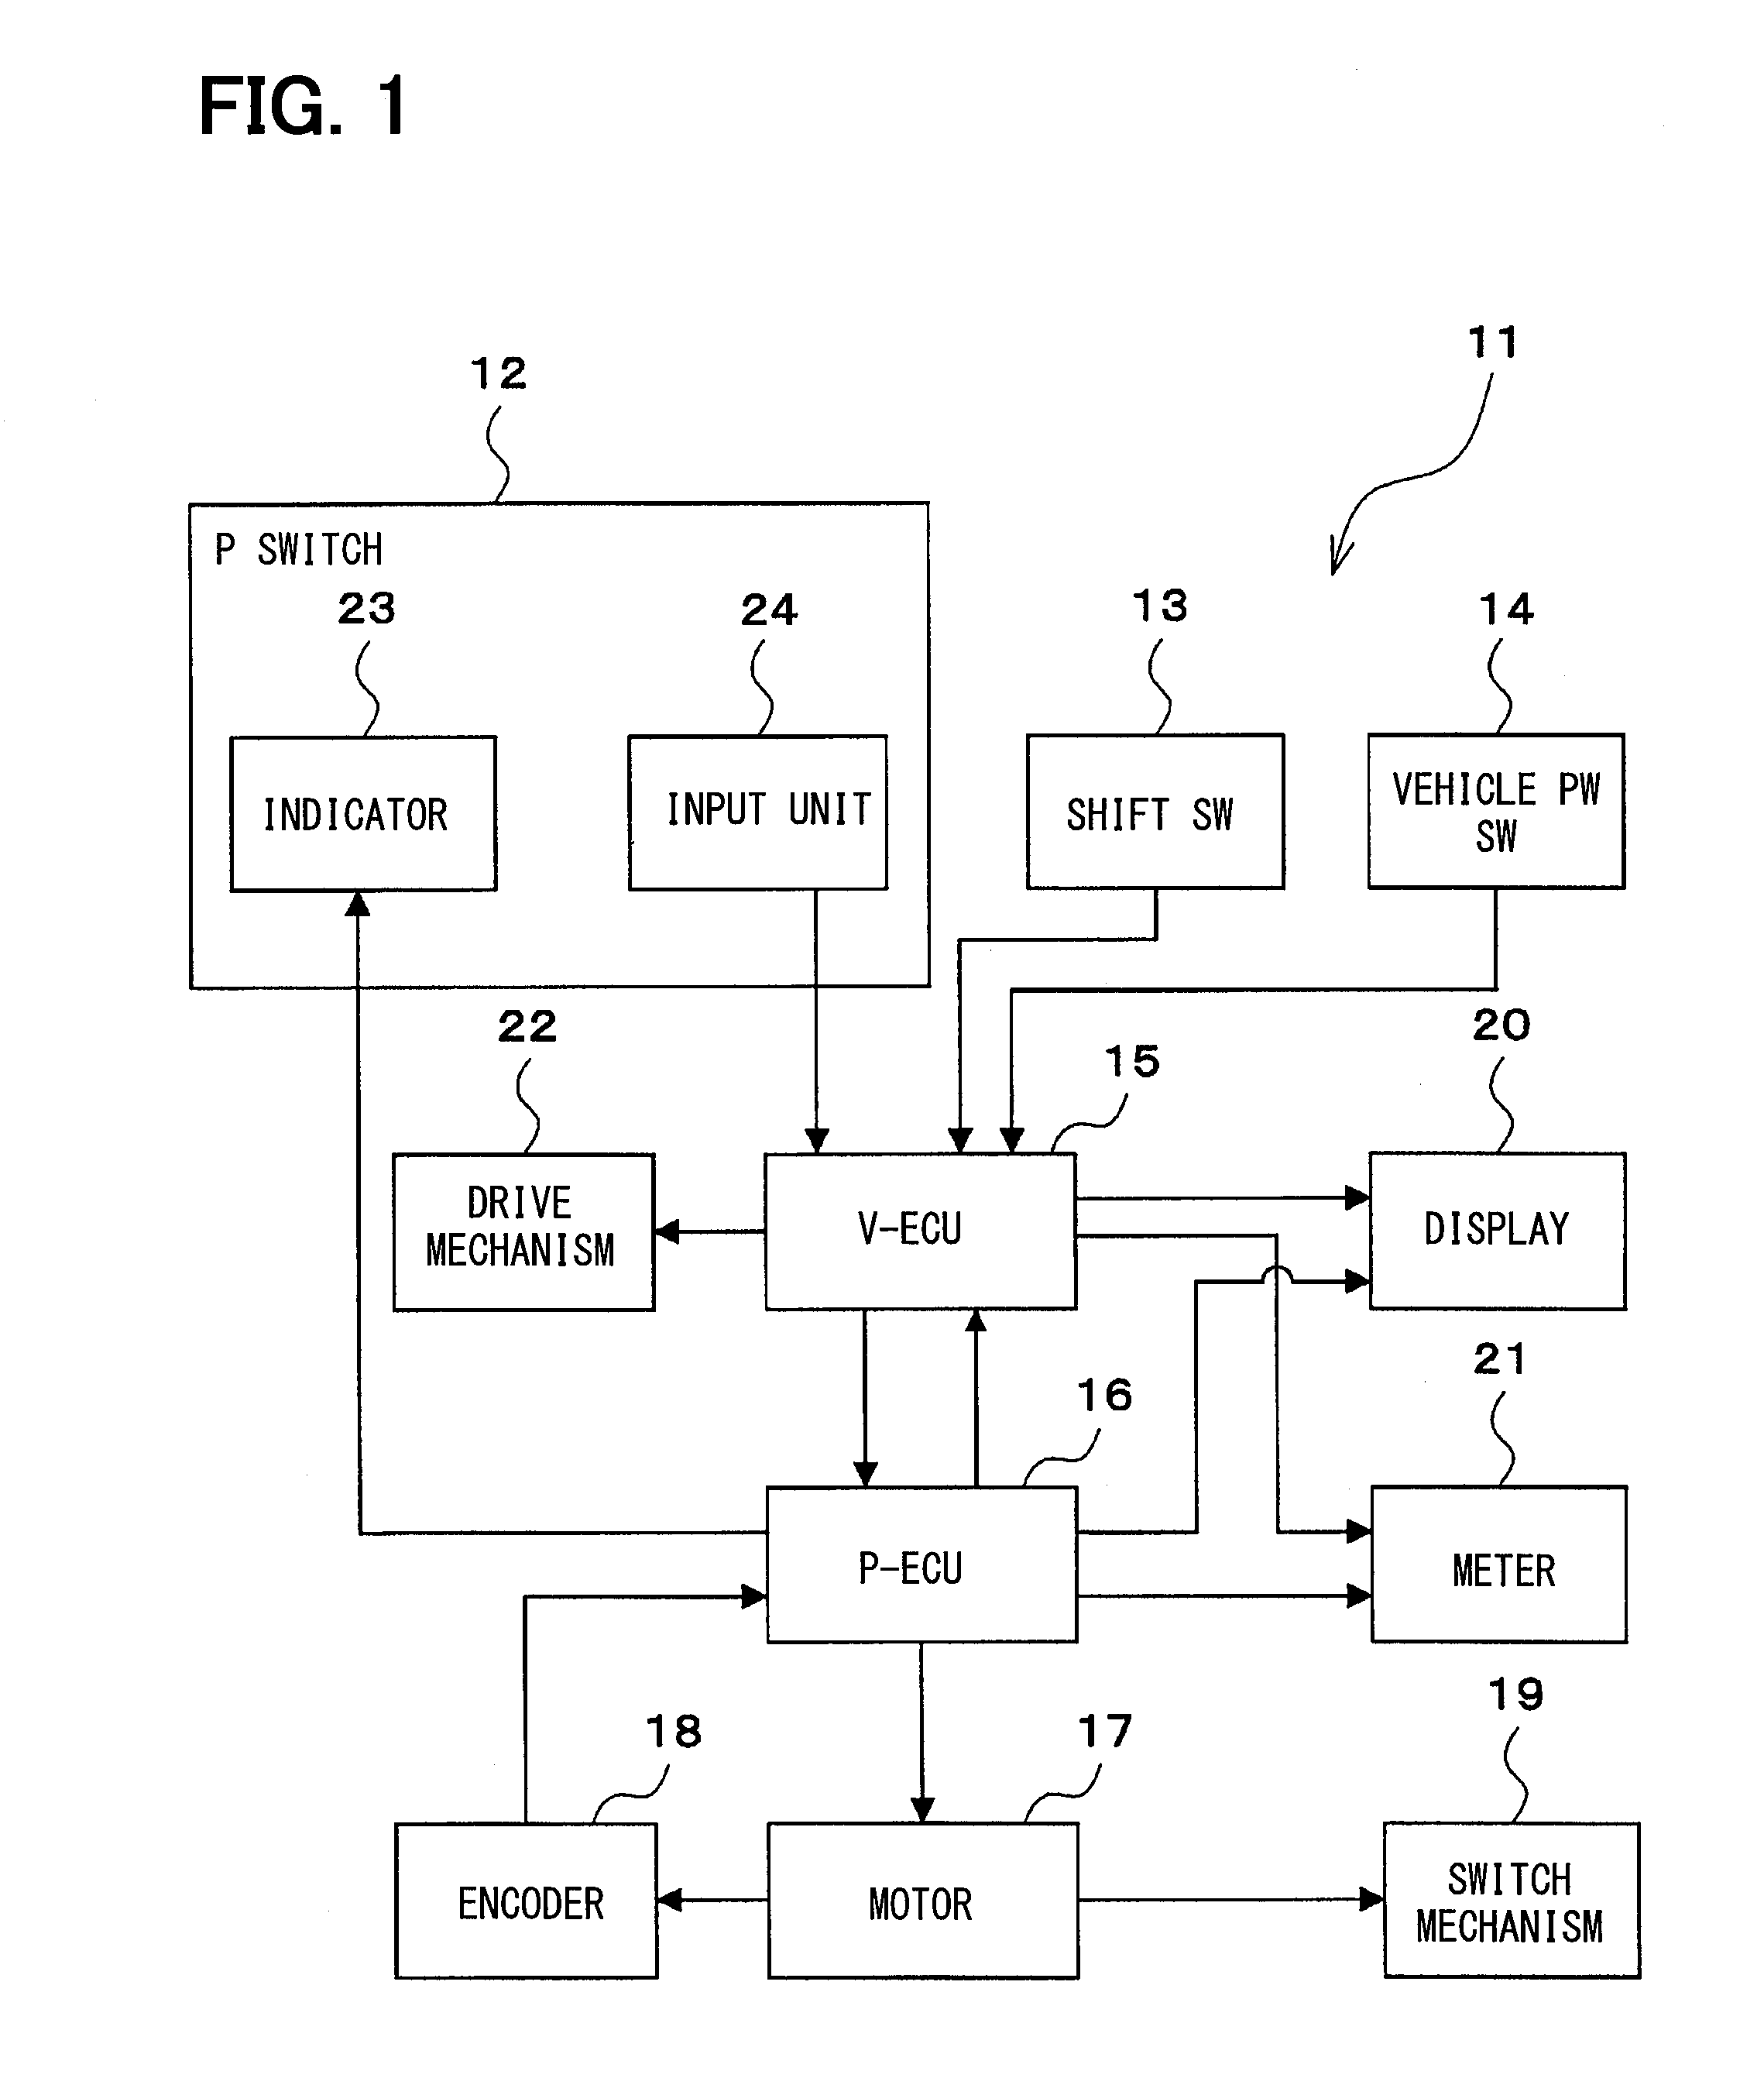 Shift position switching device